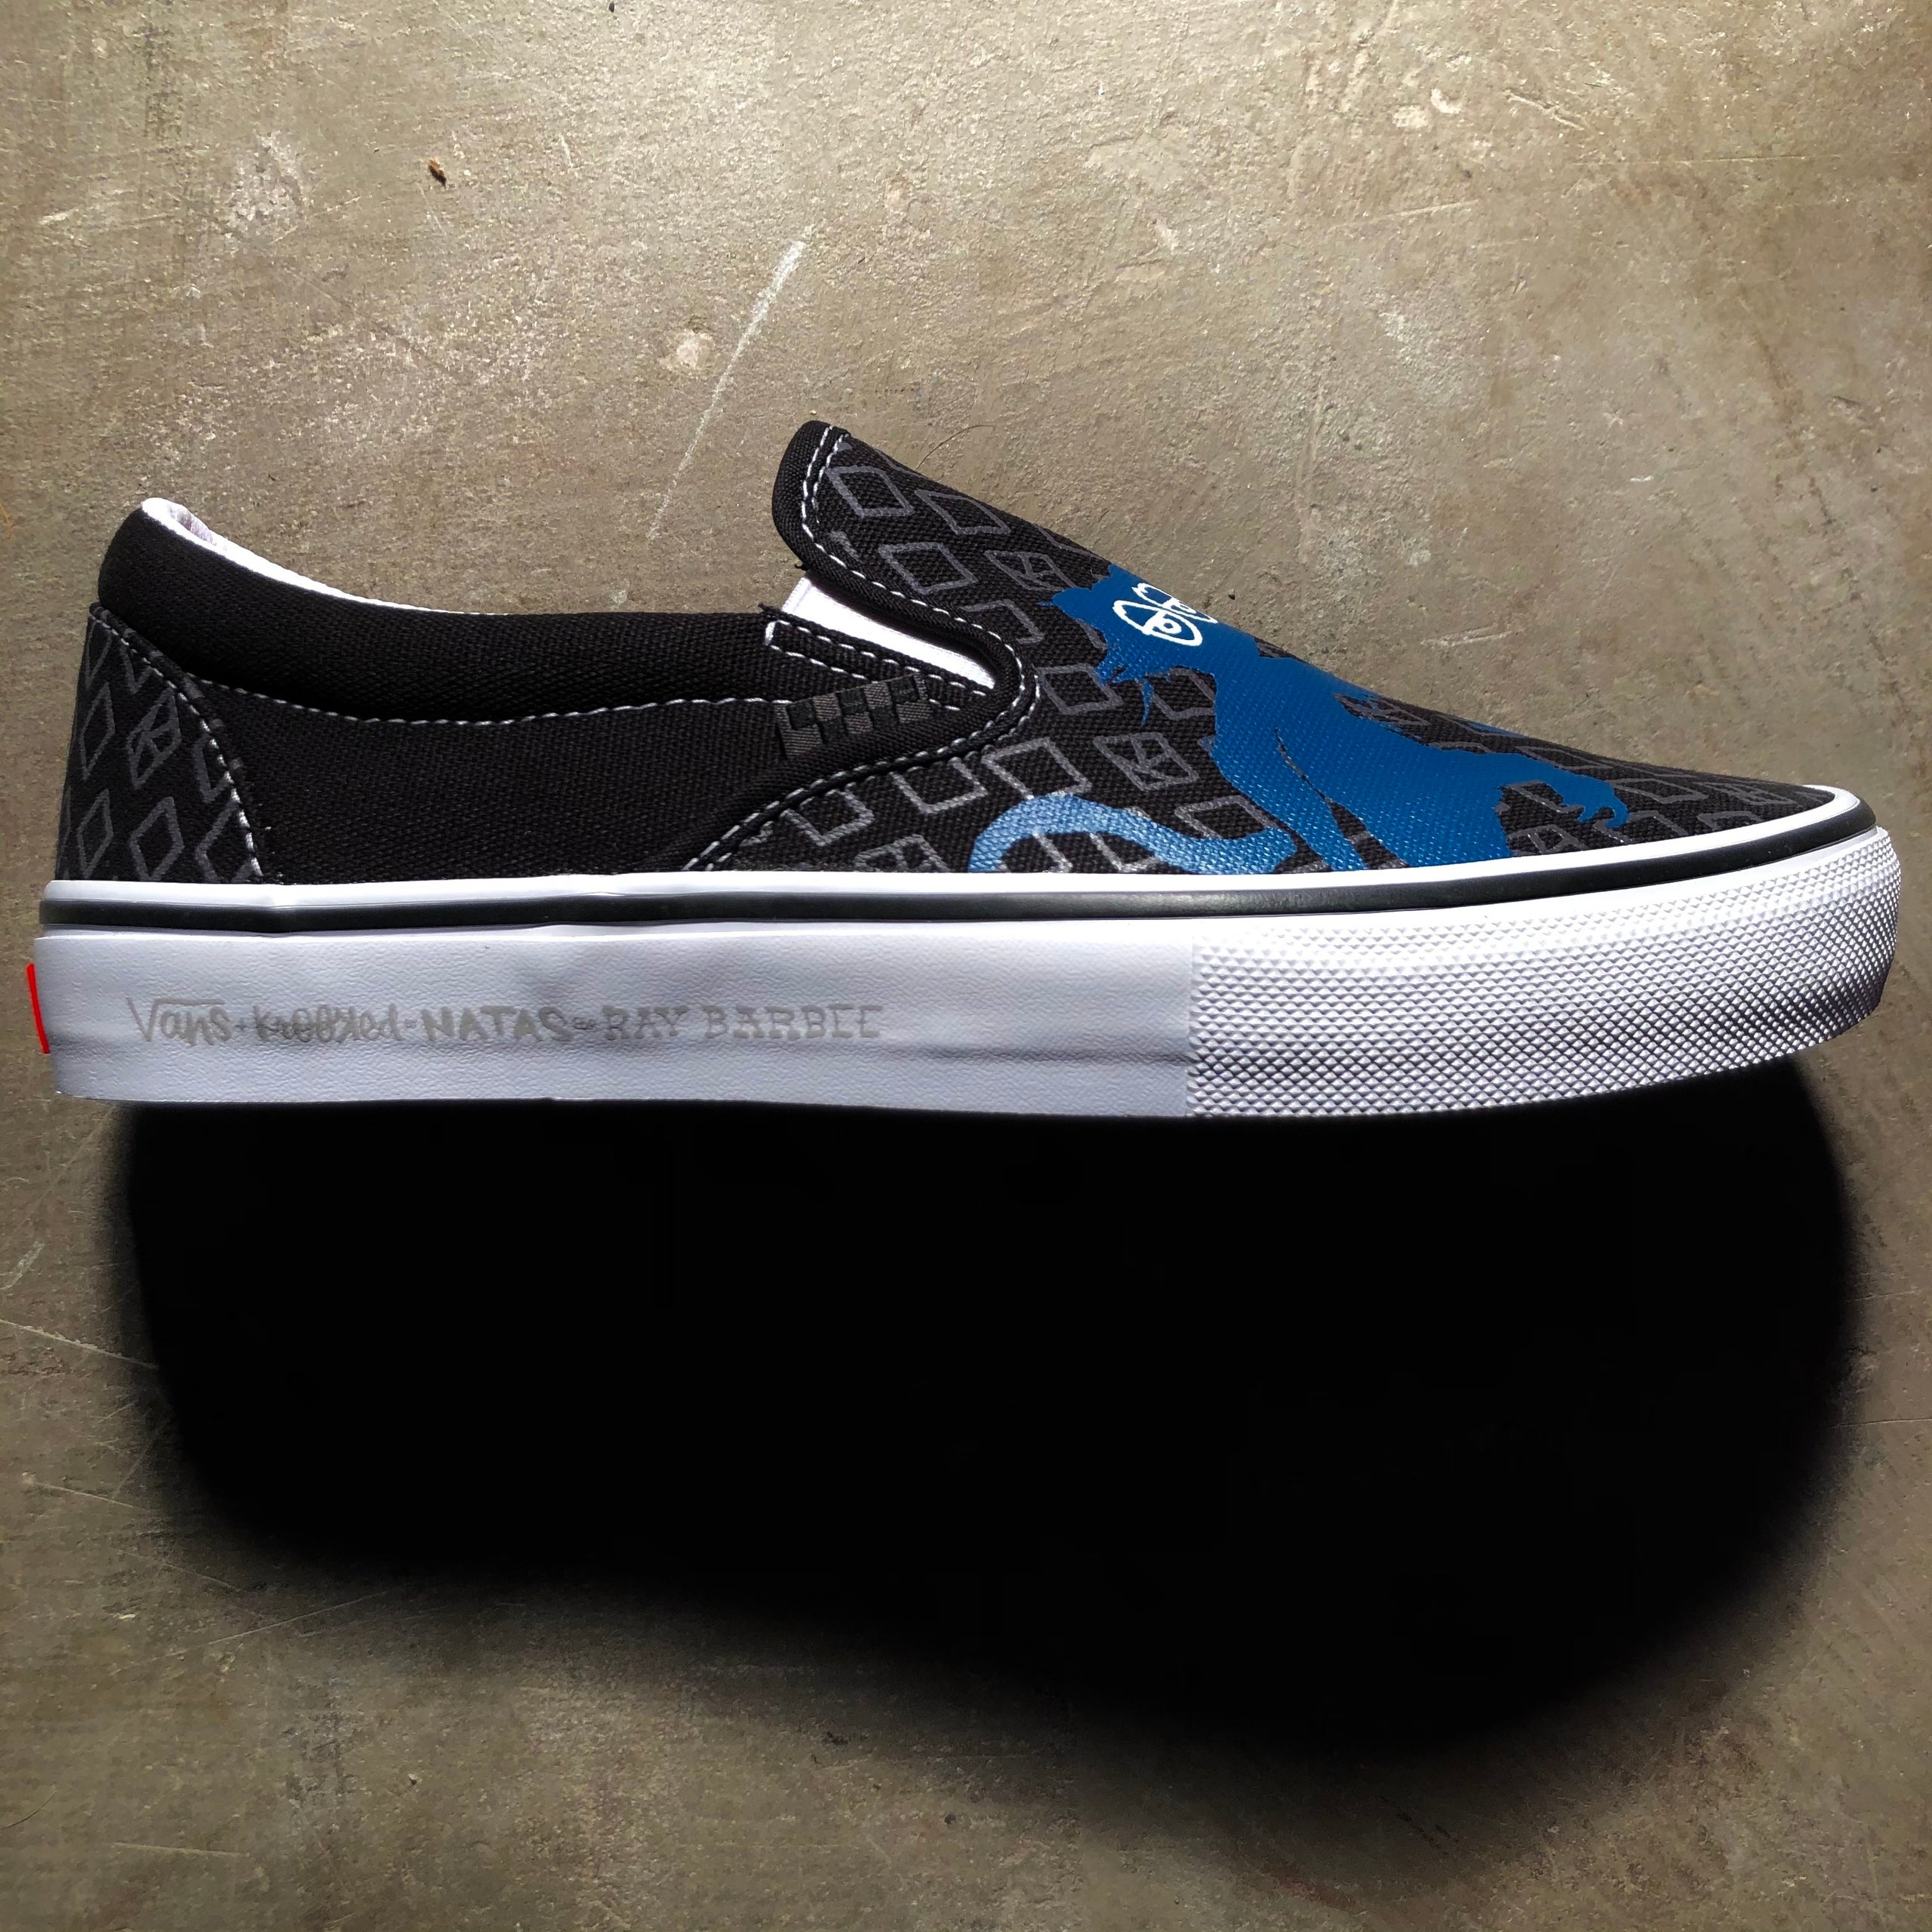 Vans Shoes and Gear | The Block Skate Supply